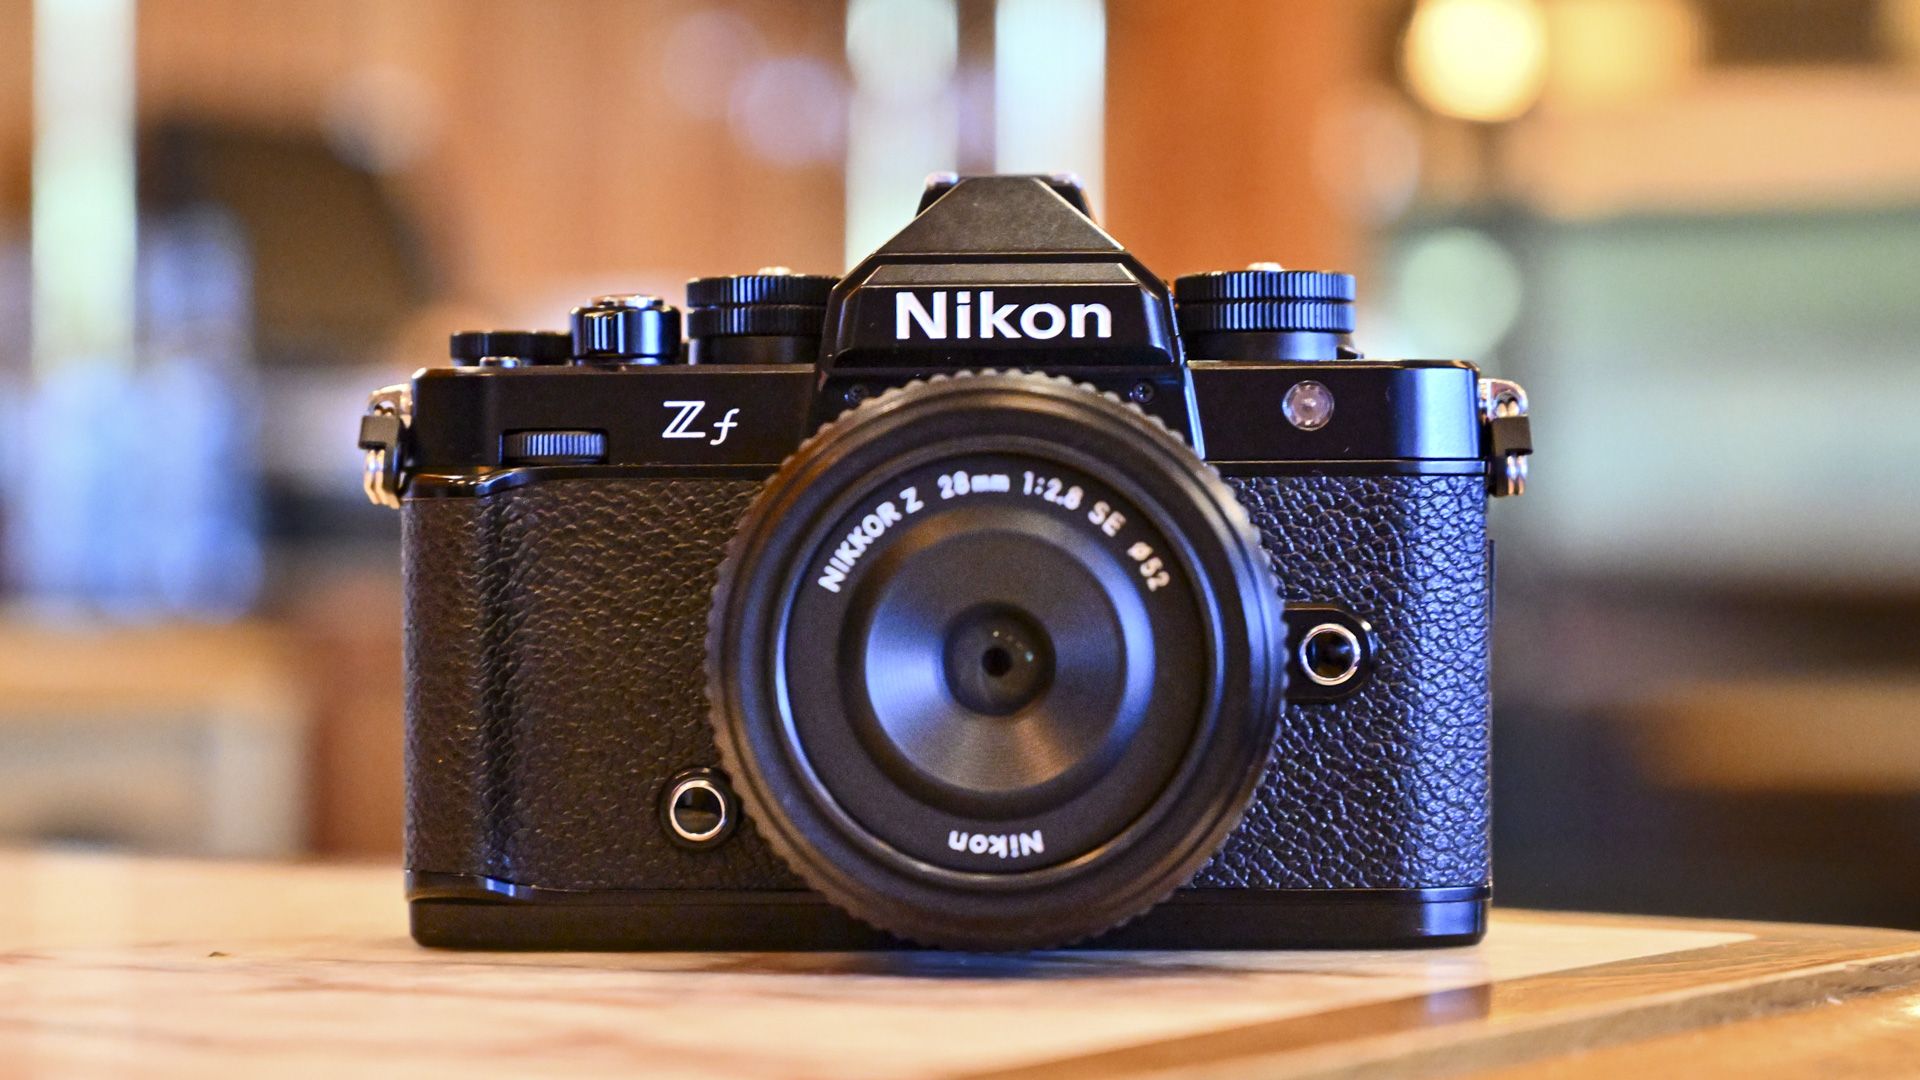 Nikon Zf camera front with Z 28mm F2.8 SE lens attached